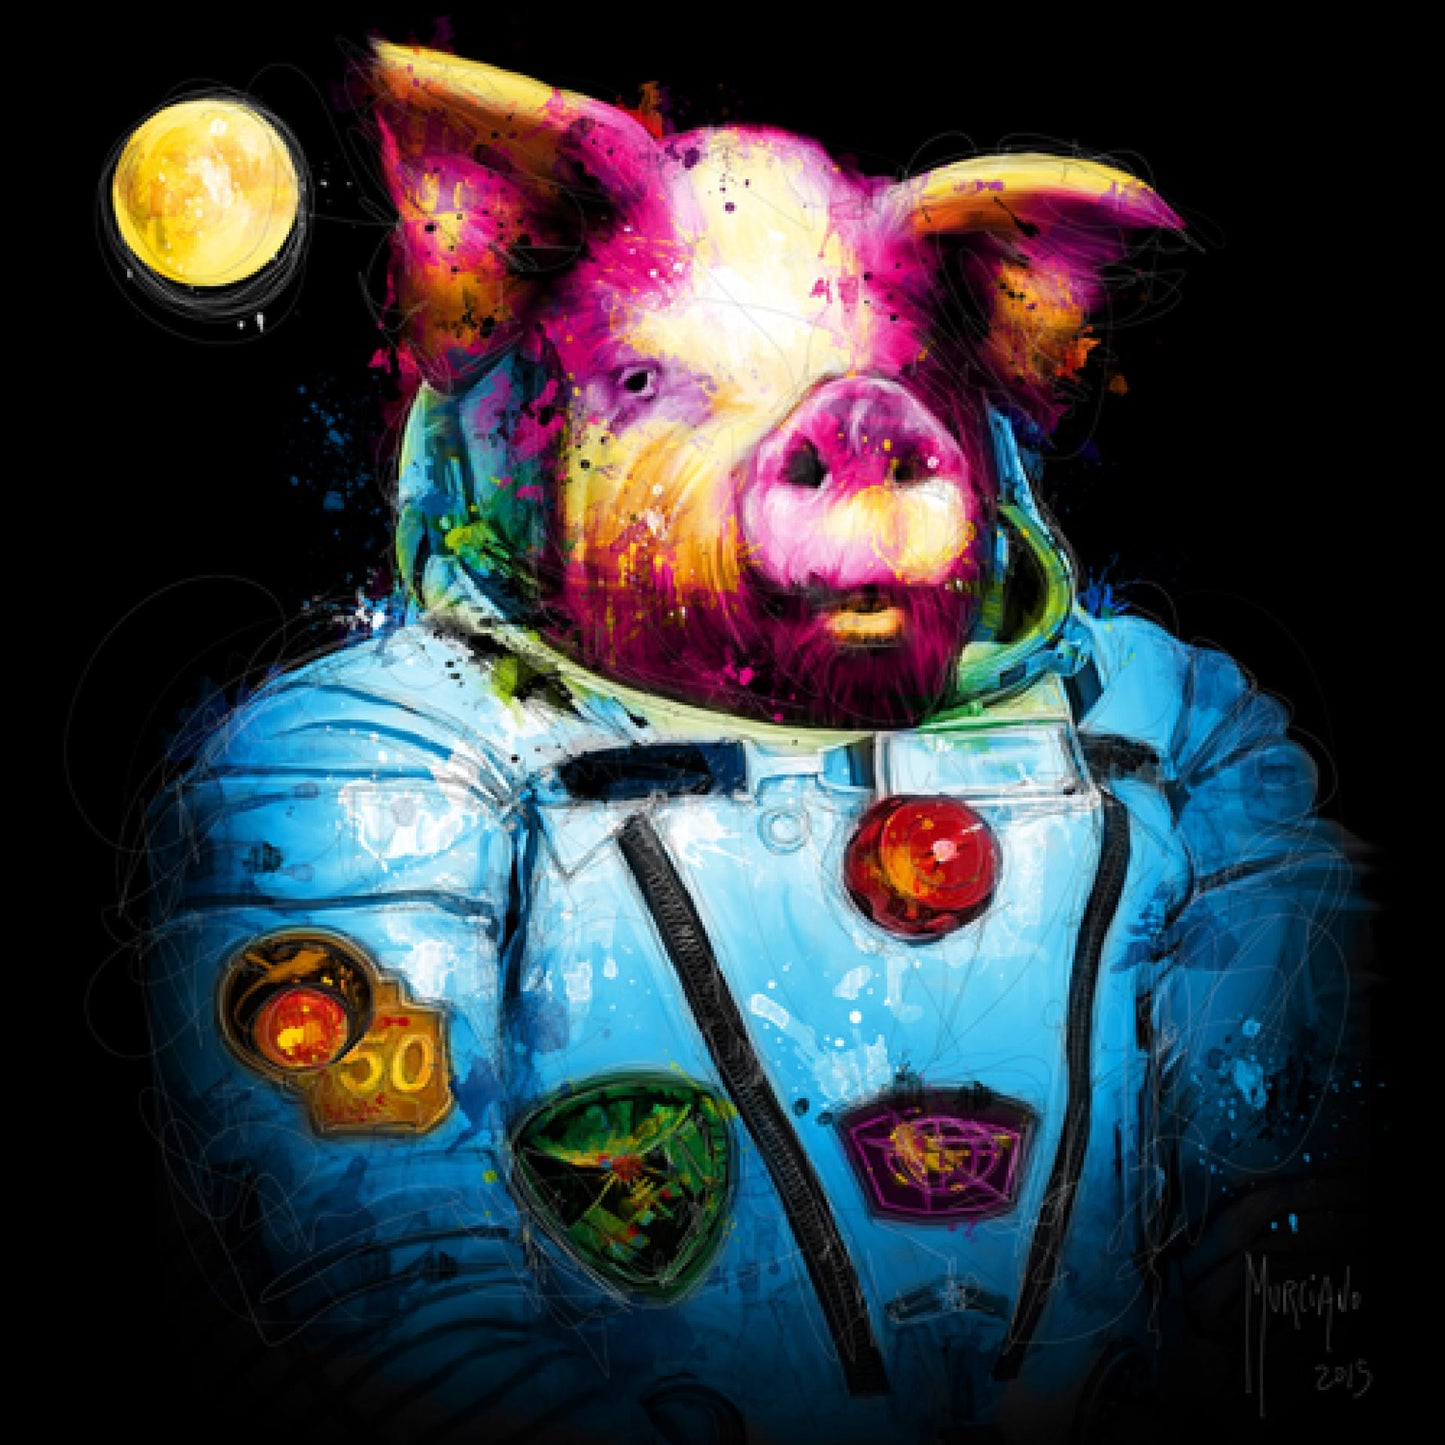 Pig in Space by Patrice Murciano - Petite